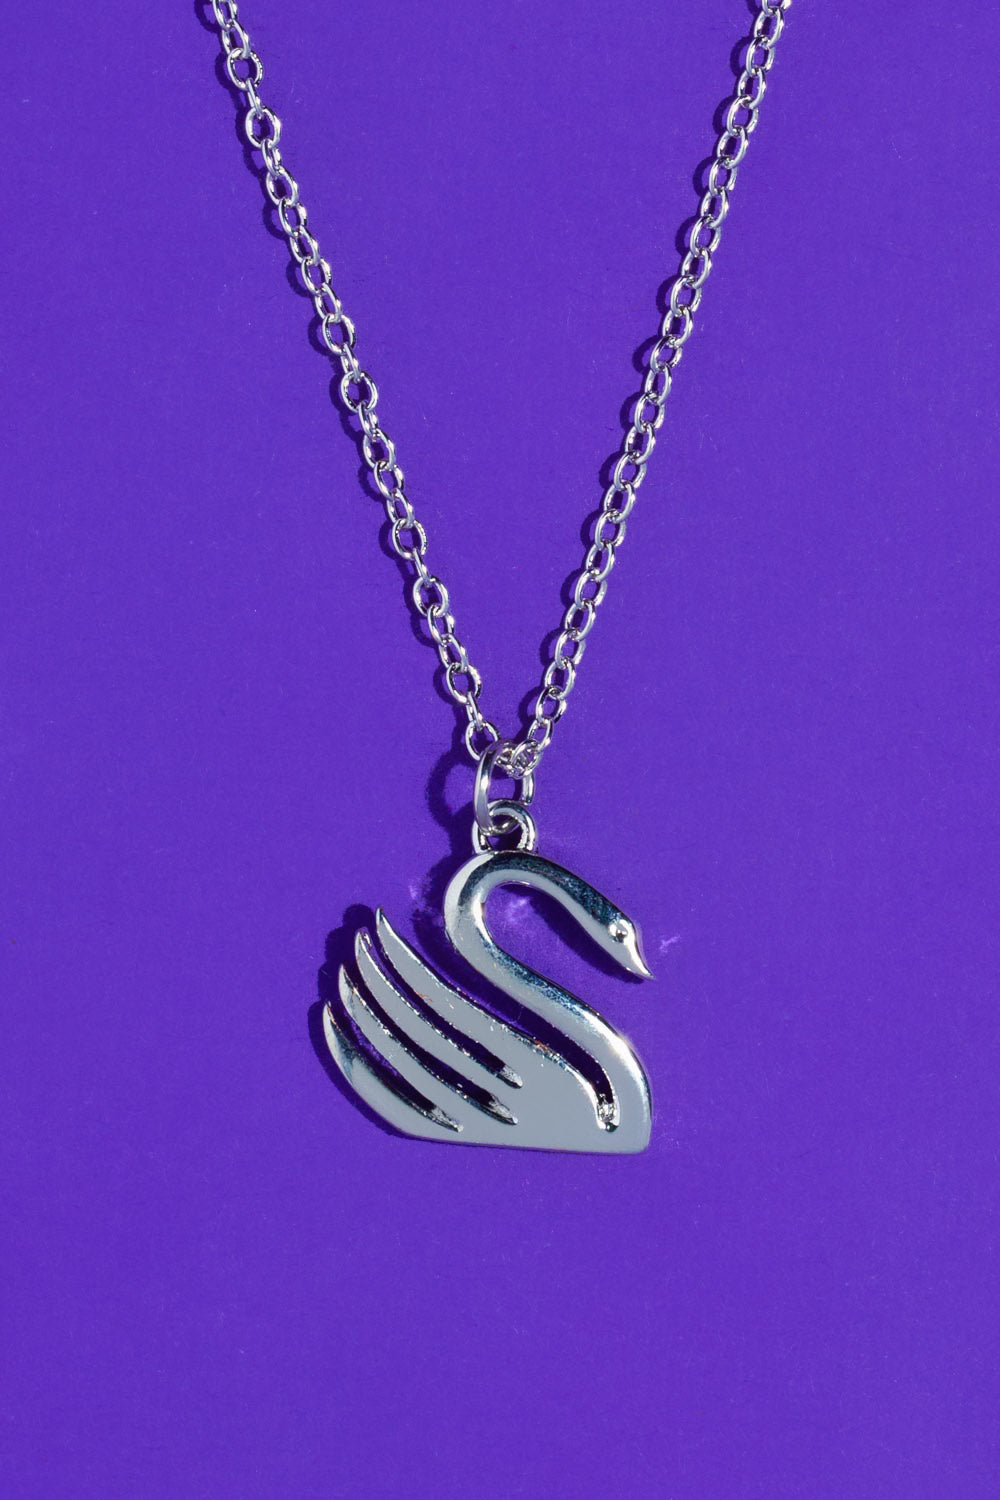 Type 4 Swan Necklace - Silver